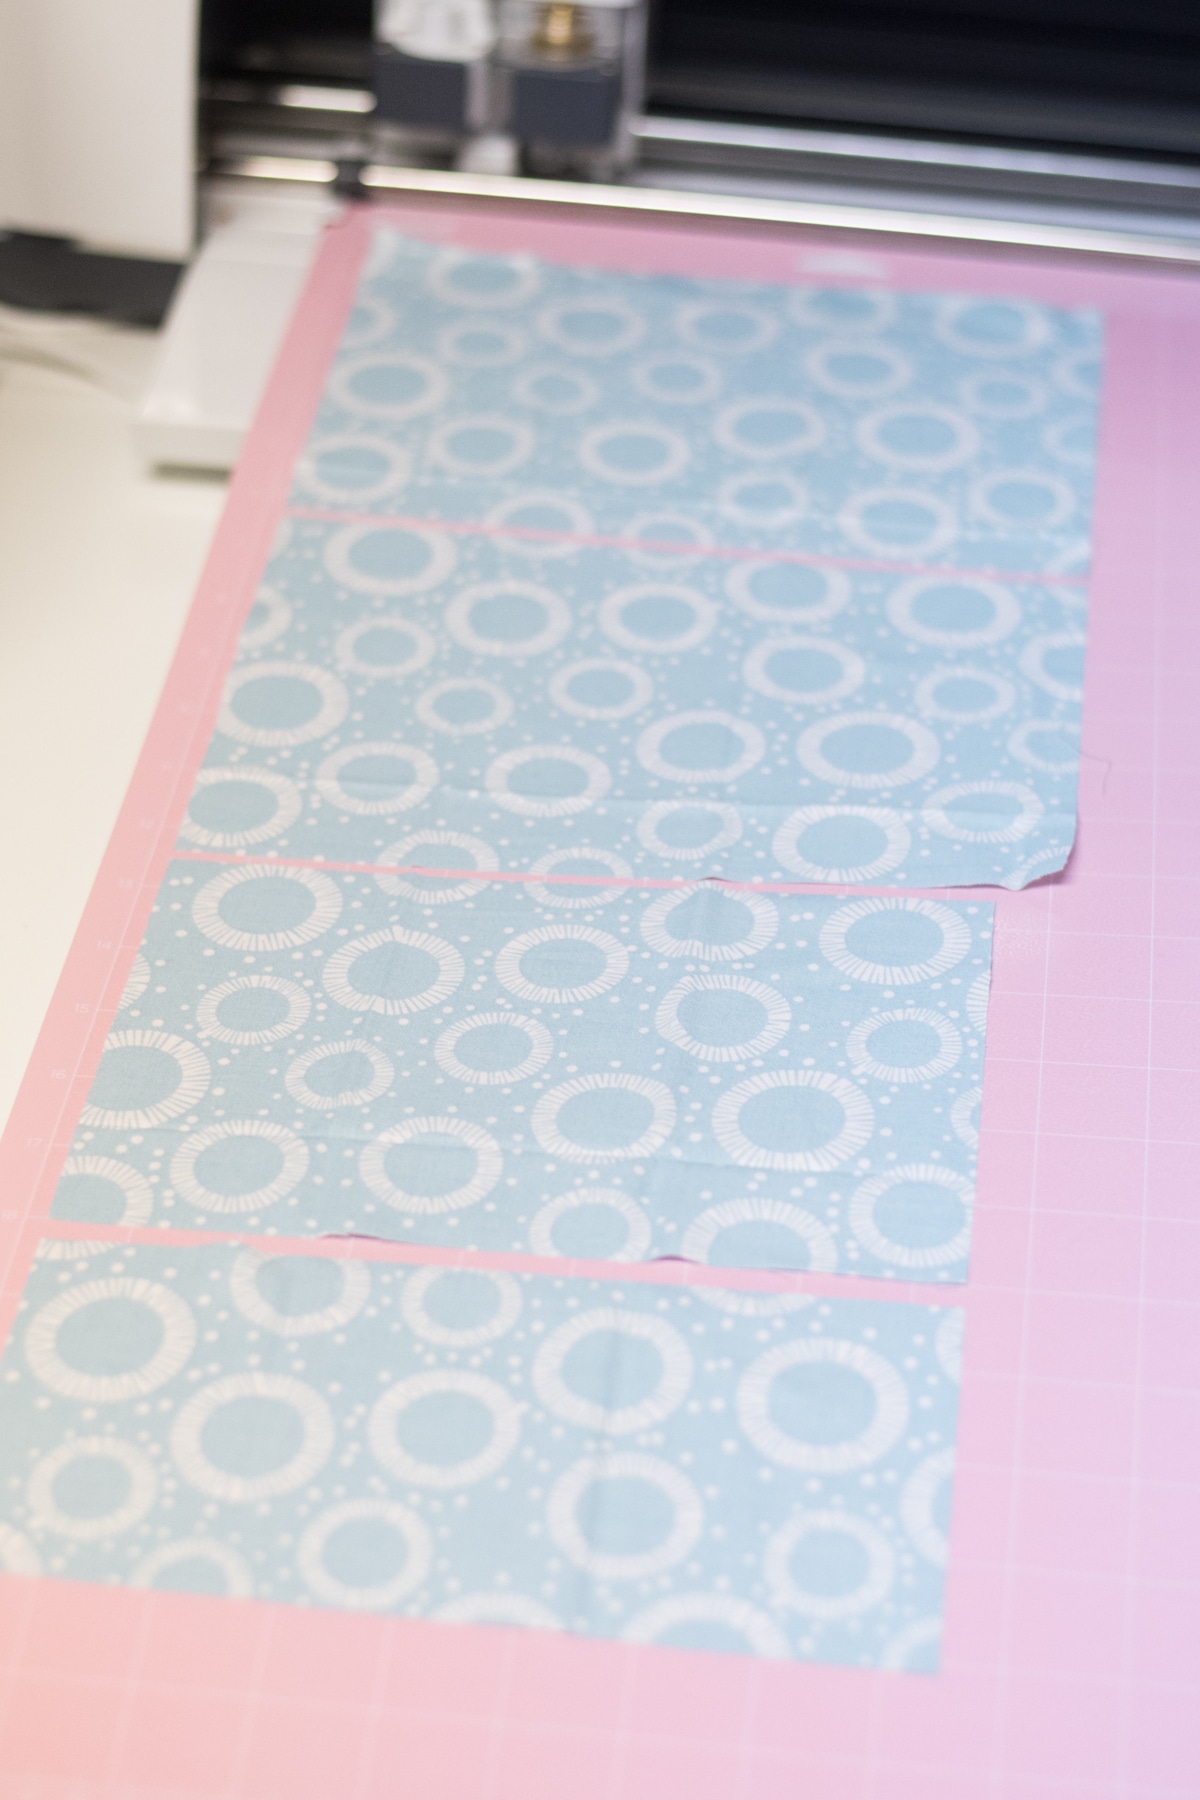 The Cricut Maker Machine & Fabric: Your Questions Answered